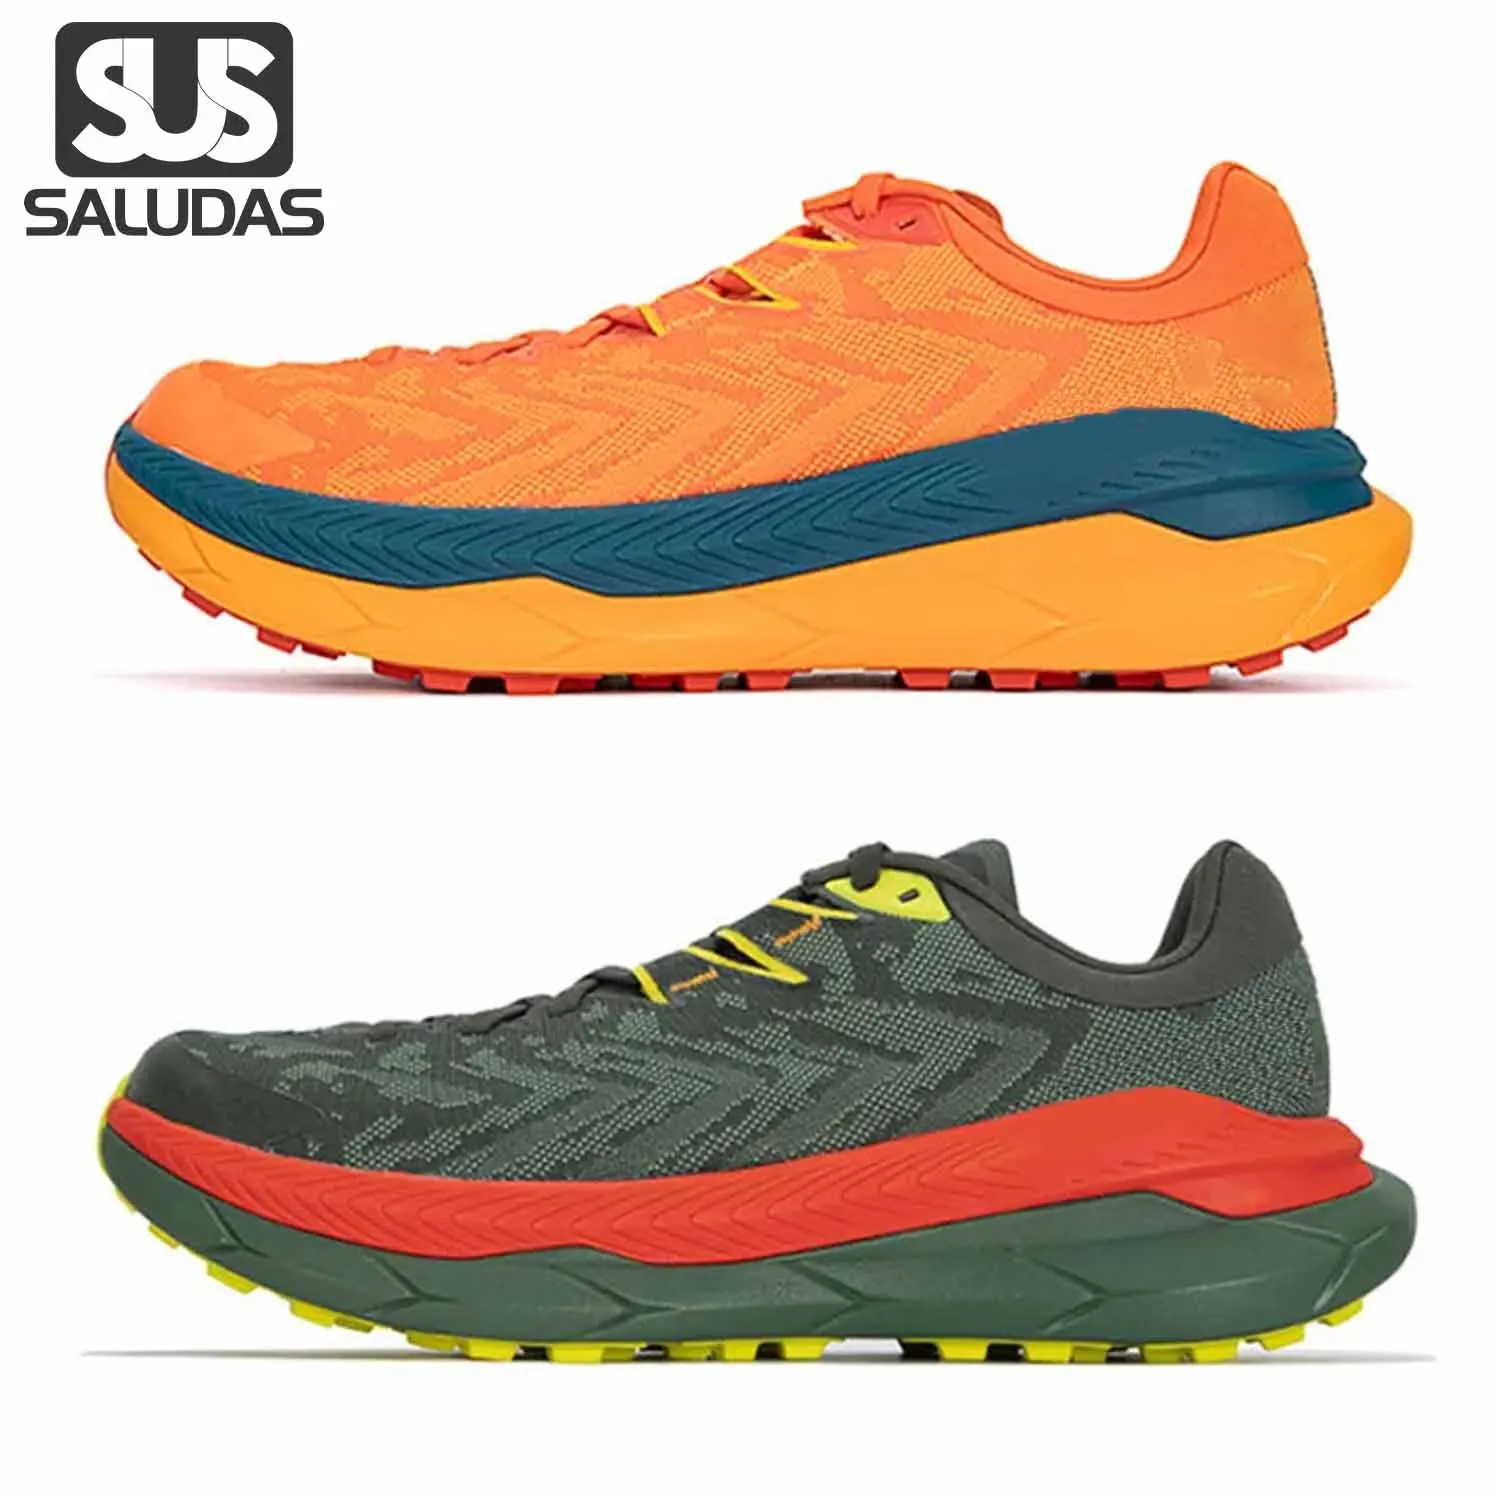 

SALUDAS Tecton X Original Running Shoes High-speed Track Cushioning Carbon Plate Marathon Running Shoes Breathable Jogging Shoes